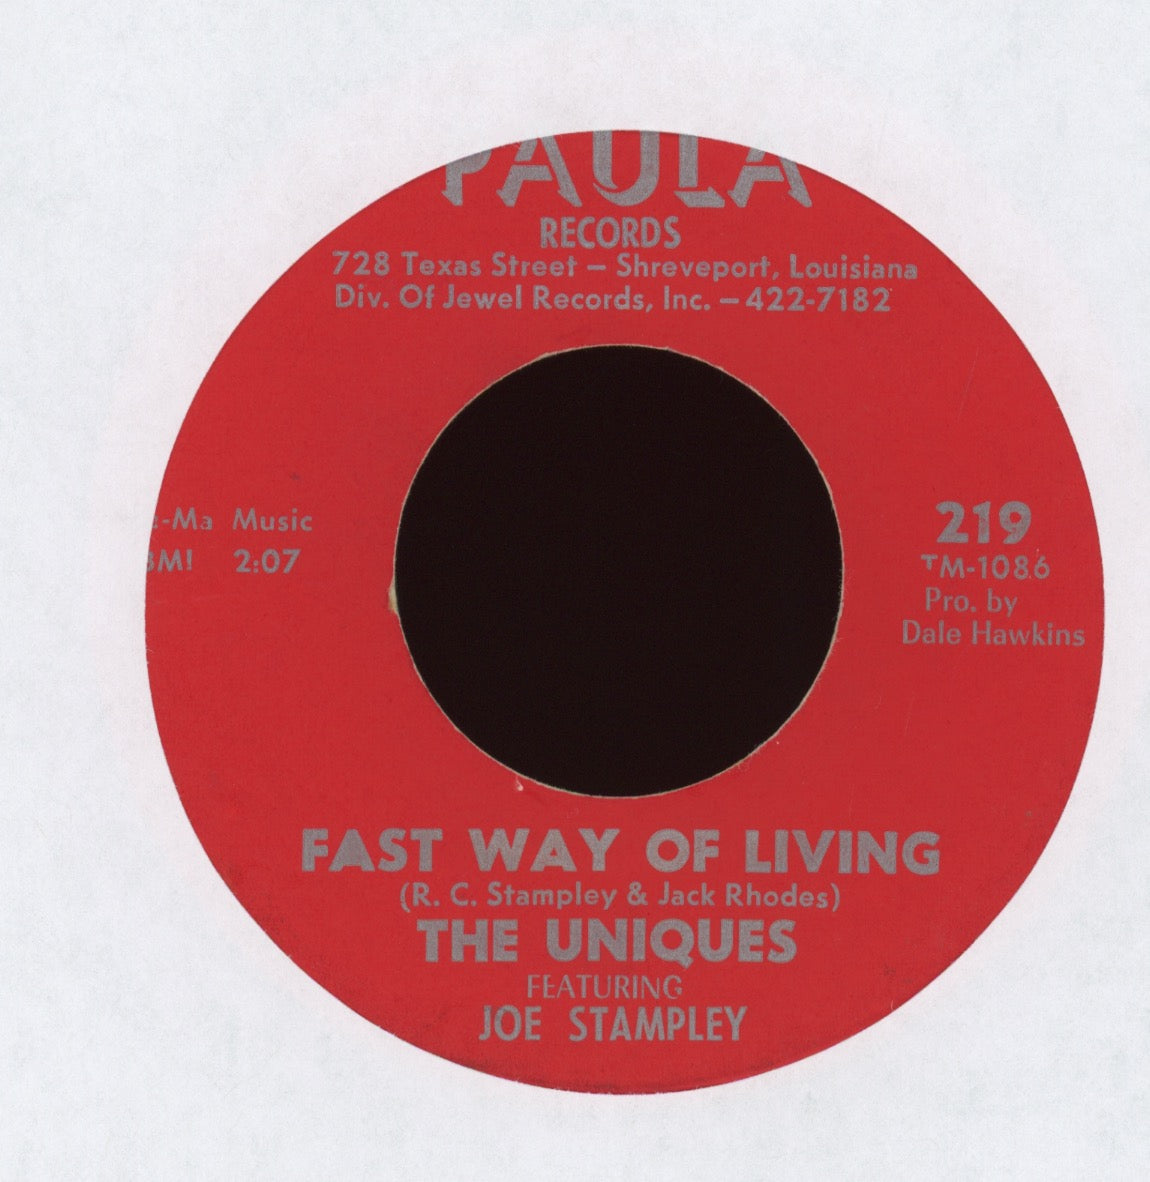 The Uniques Featuring Joe Stampley - Not Too Long Ago on Paula Northern Soul 45